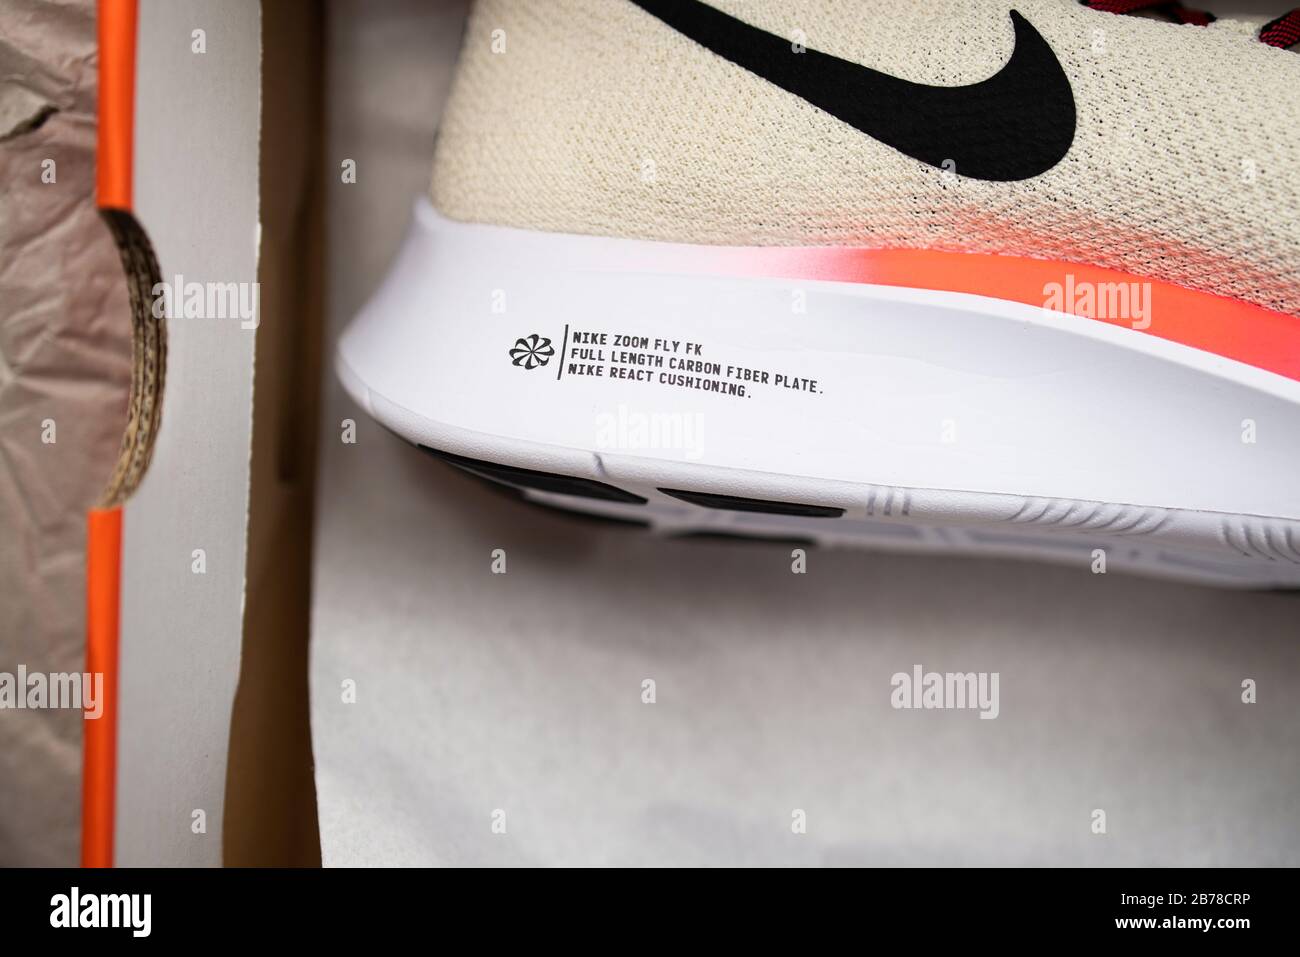 Paris, France - Jul 8, 2019: Macro detail of new professional sole of Nike  Zoom Fly FK with full length carbon fiber place and with Nike react cushion  Stock Photo - Alamy